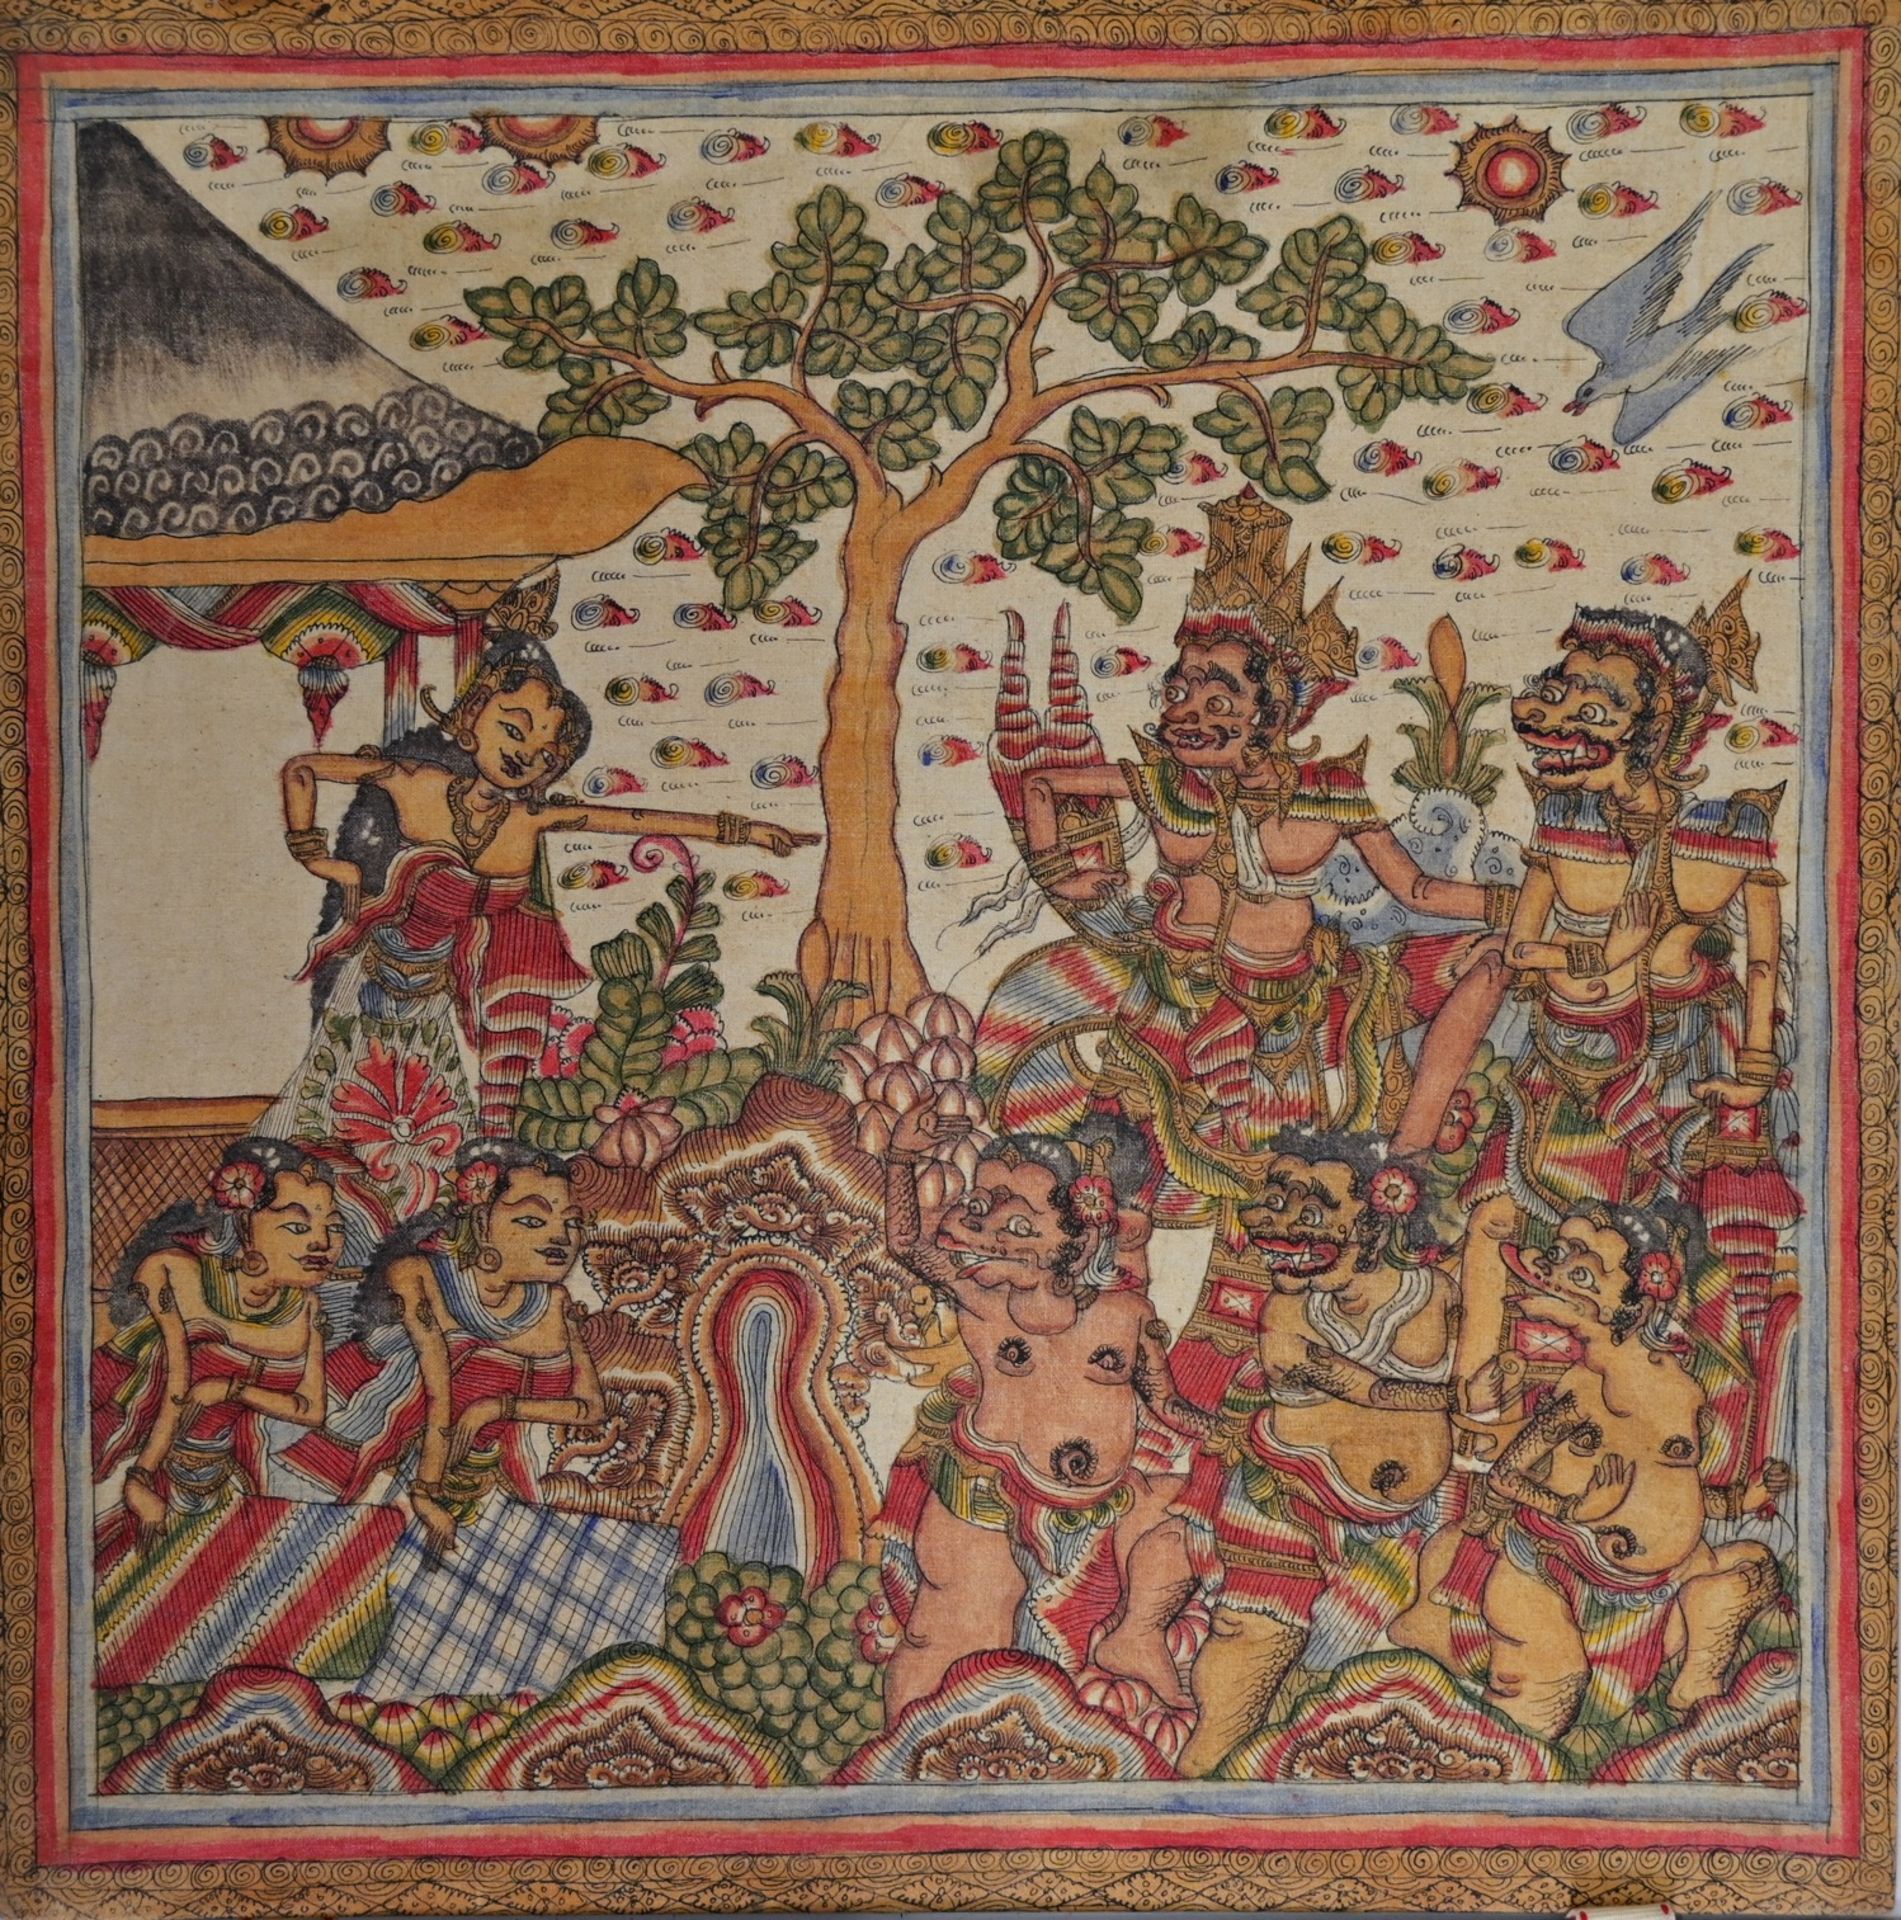 Four (4) traditional Buddhist, Indonesia, painting on fabric bound together, 20th century. - Image 3 of 6